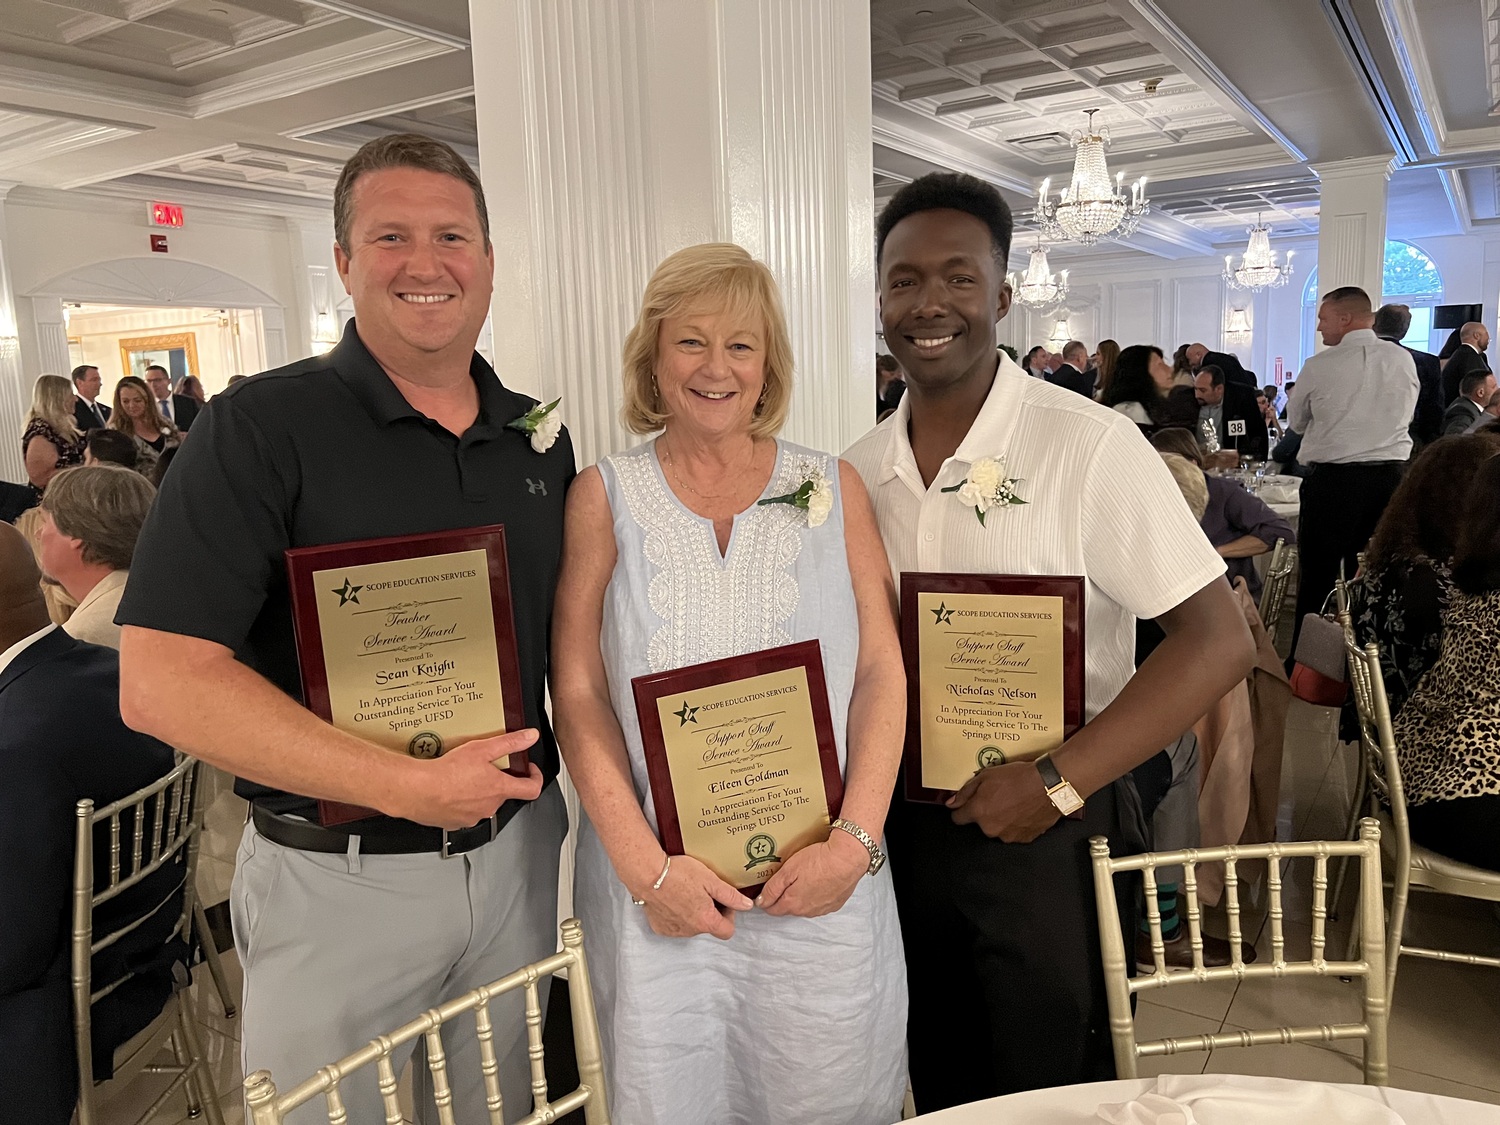 Springs School science teacher Sean Knight, teacher assistant Eileen Goldman and custodian Nick Nelson were recently honored with SCOPE Education Services awards in appreciation of their outstanding service. COURTESY SPRINGS SCHOOL